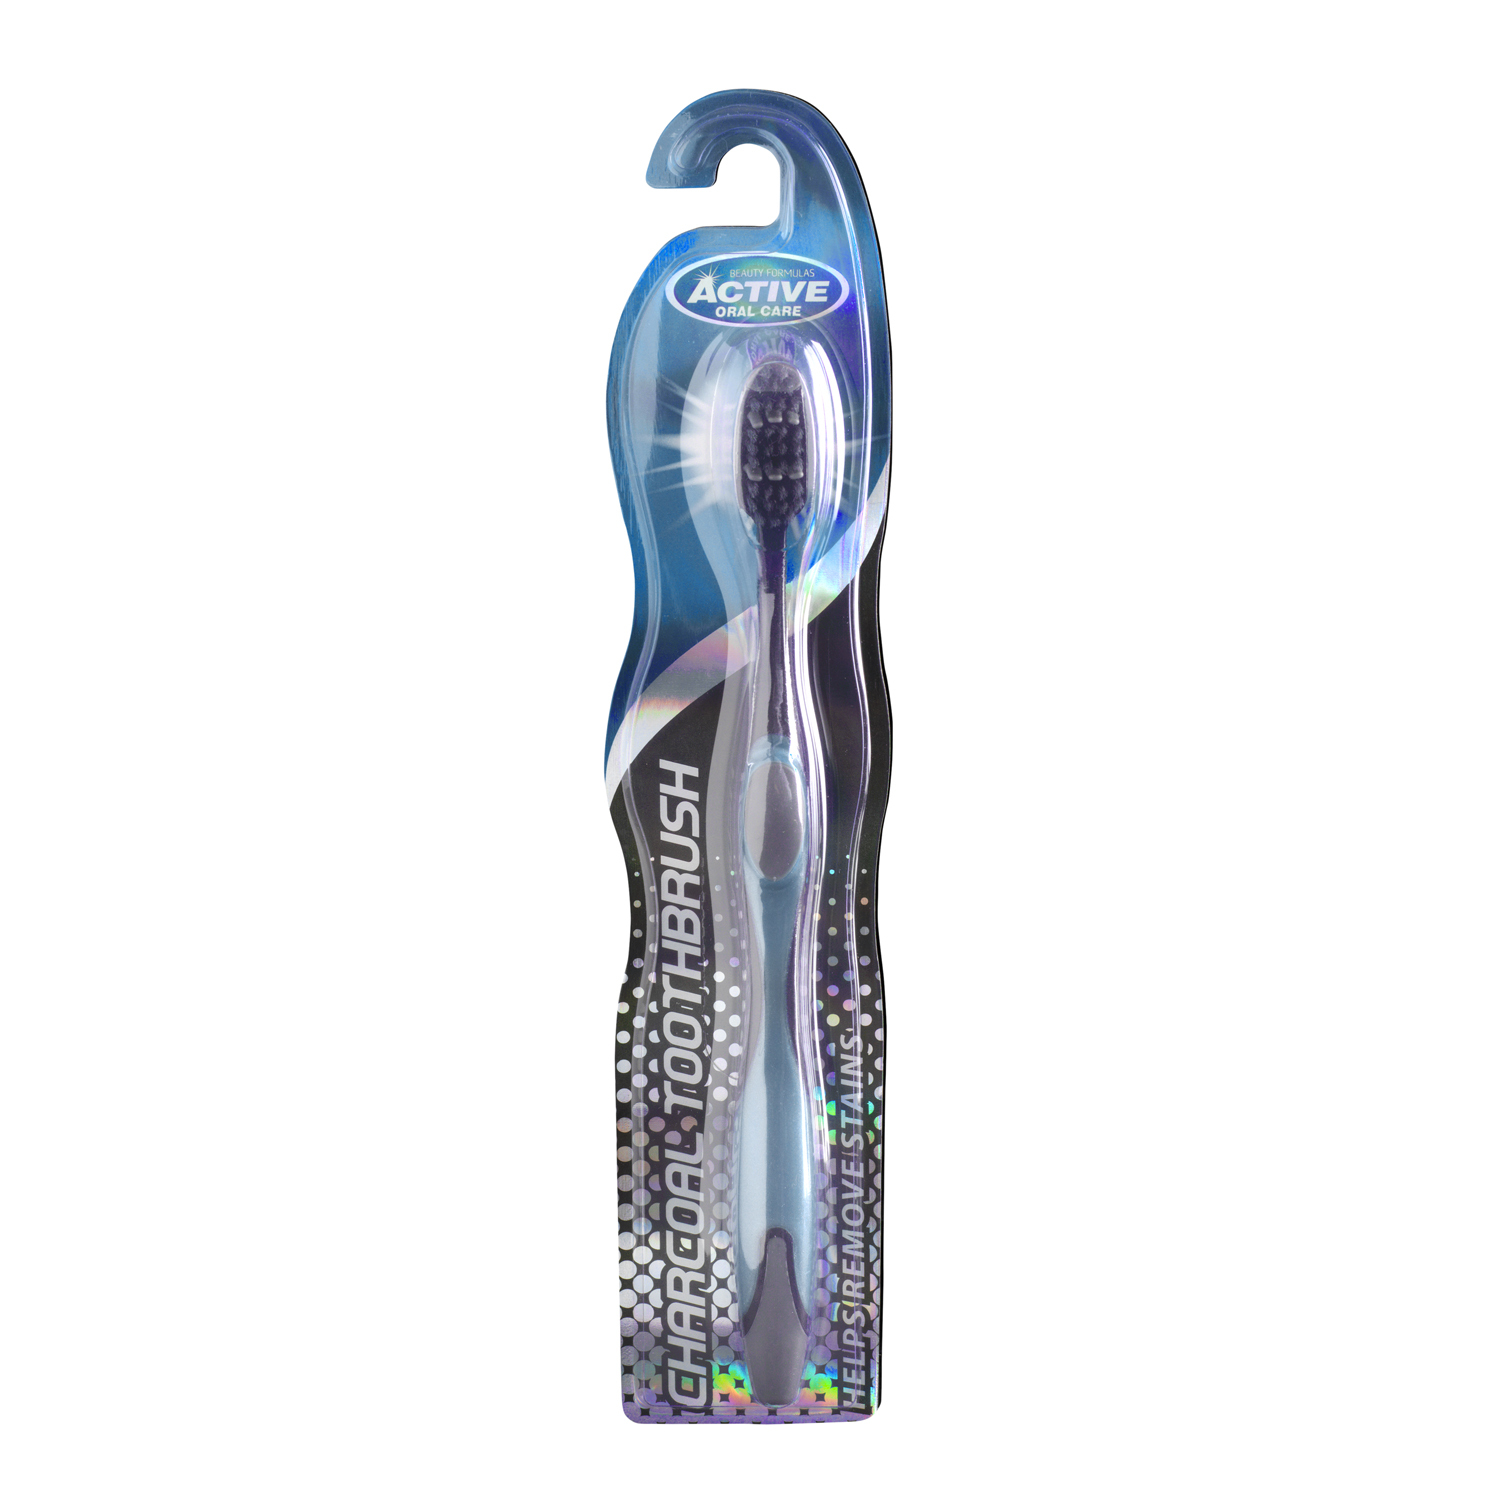 Beauty Formulas Active Oral Care Charcoal Toothbrush Image